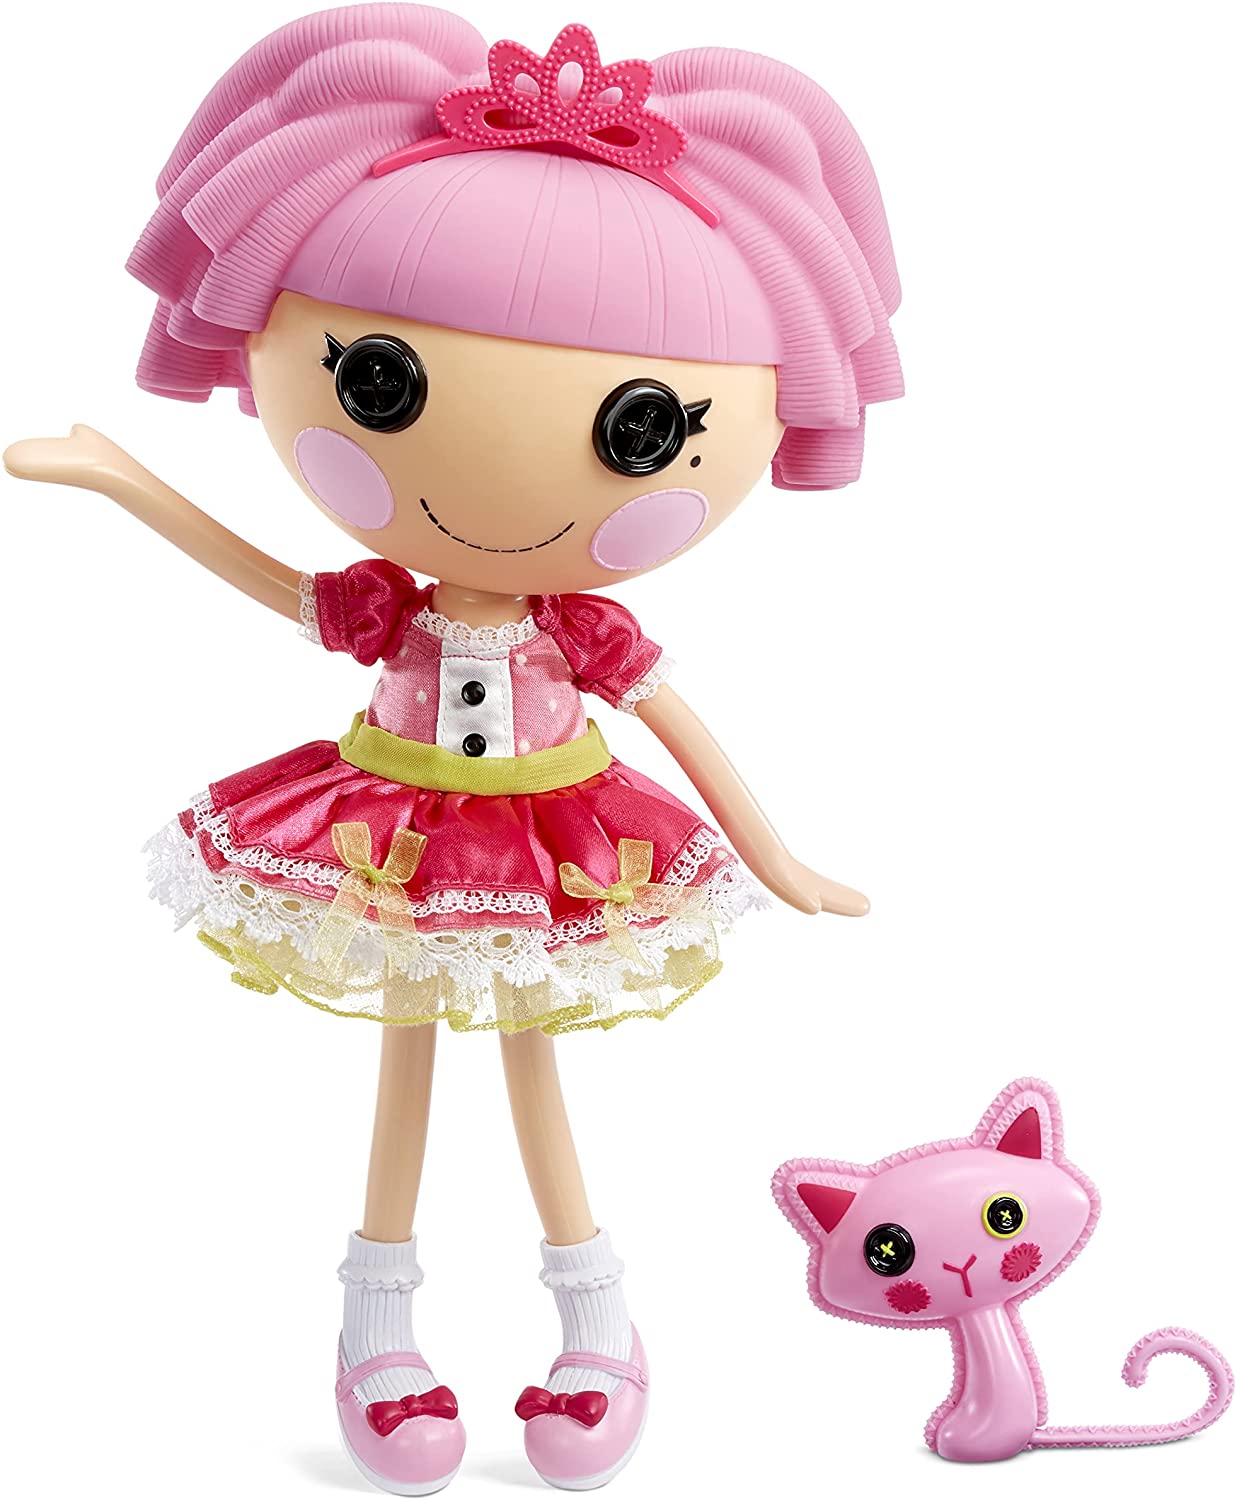 13" Lalaloopsy Princess Doll Playset (Jewel Sparkles & Pet Persian Cat) $8.17 + Free Shipping w/ Prime or FS on $25+